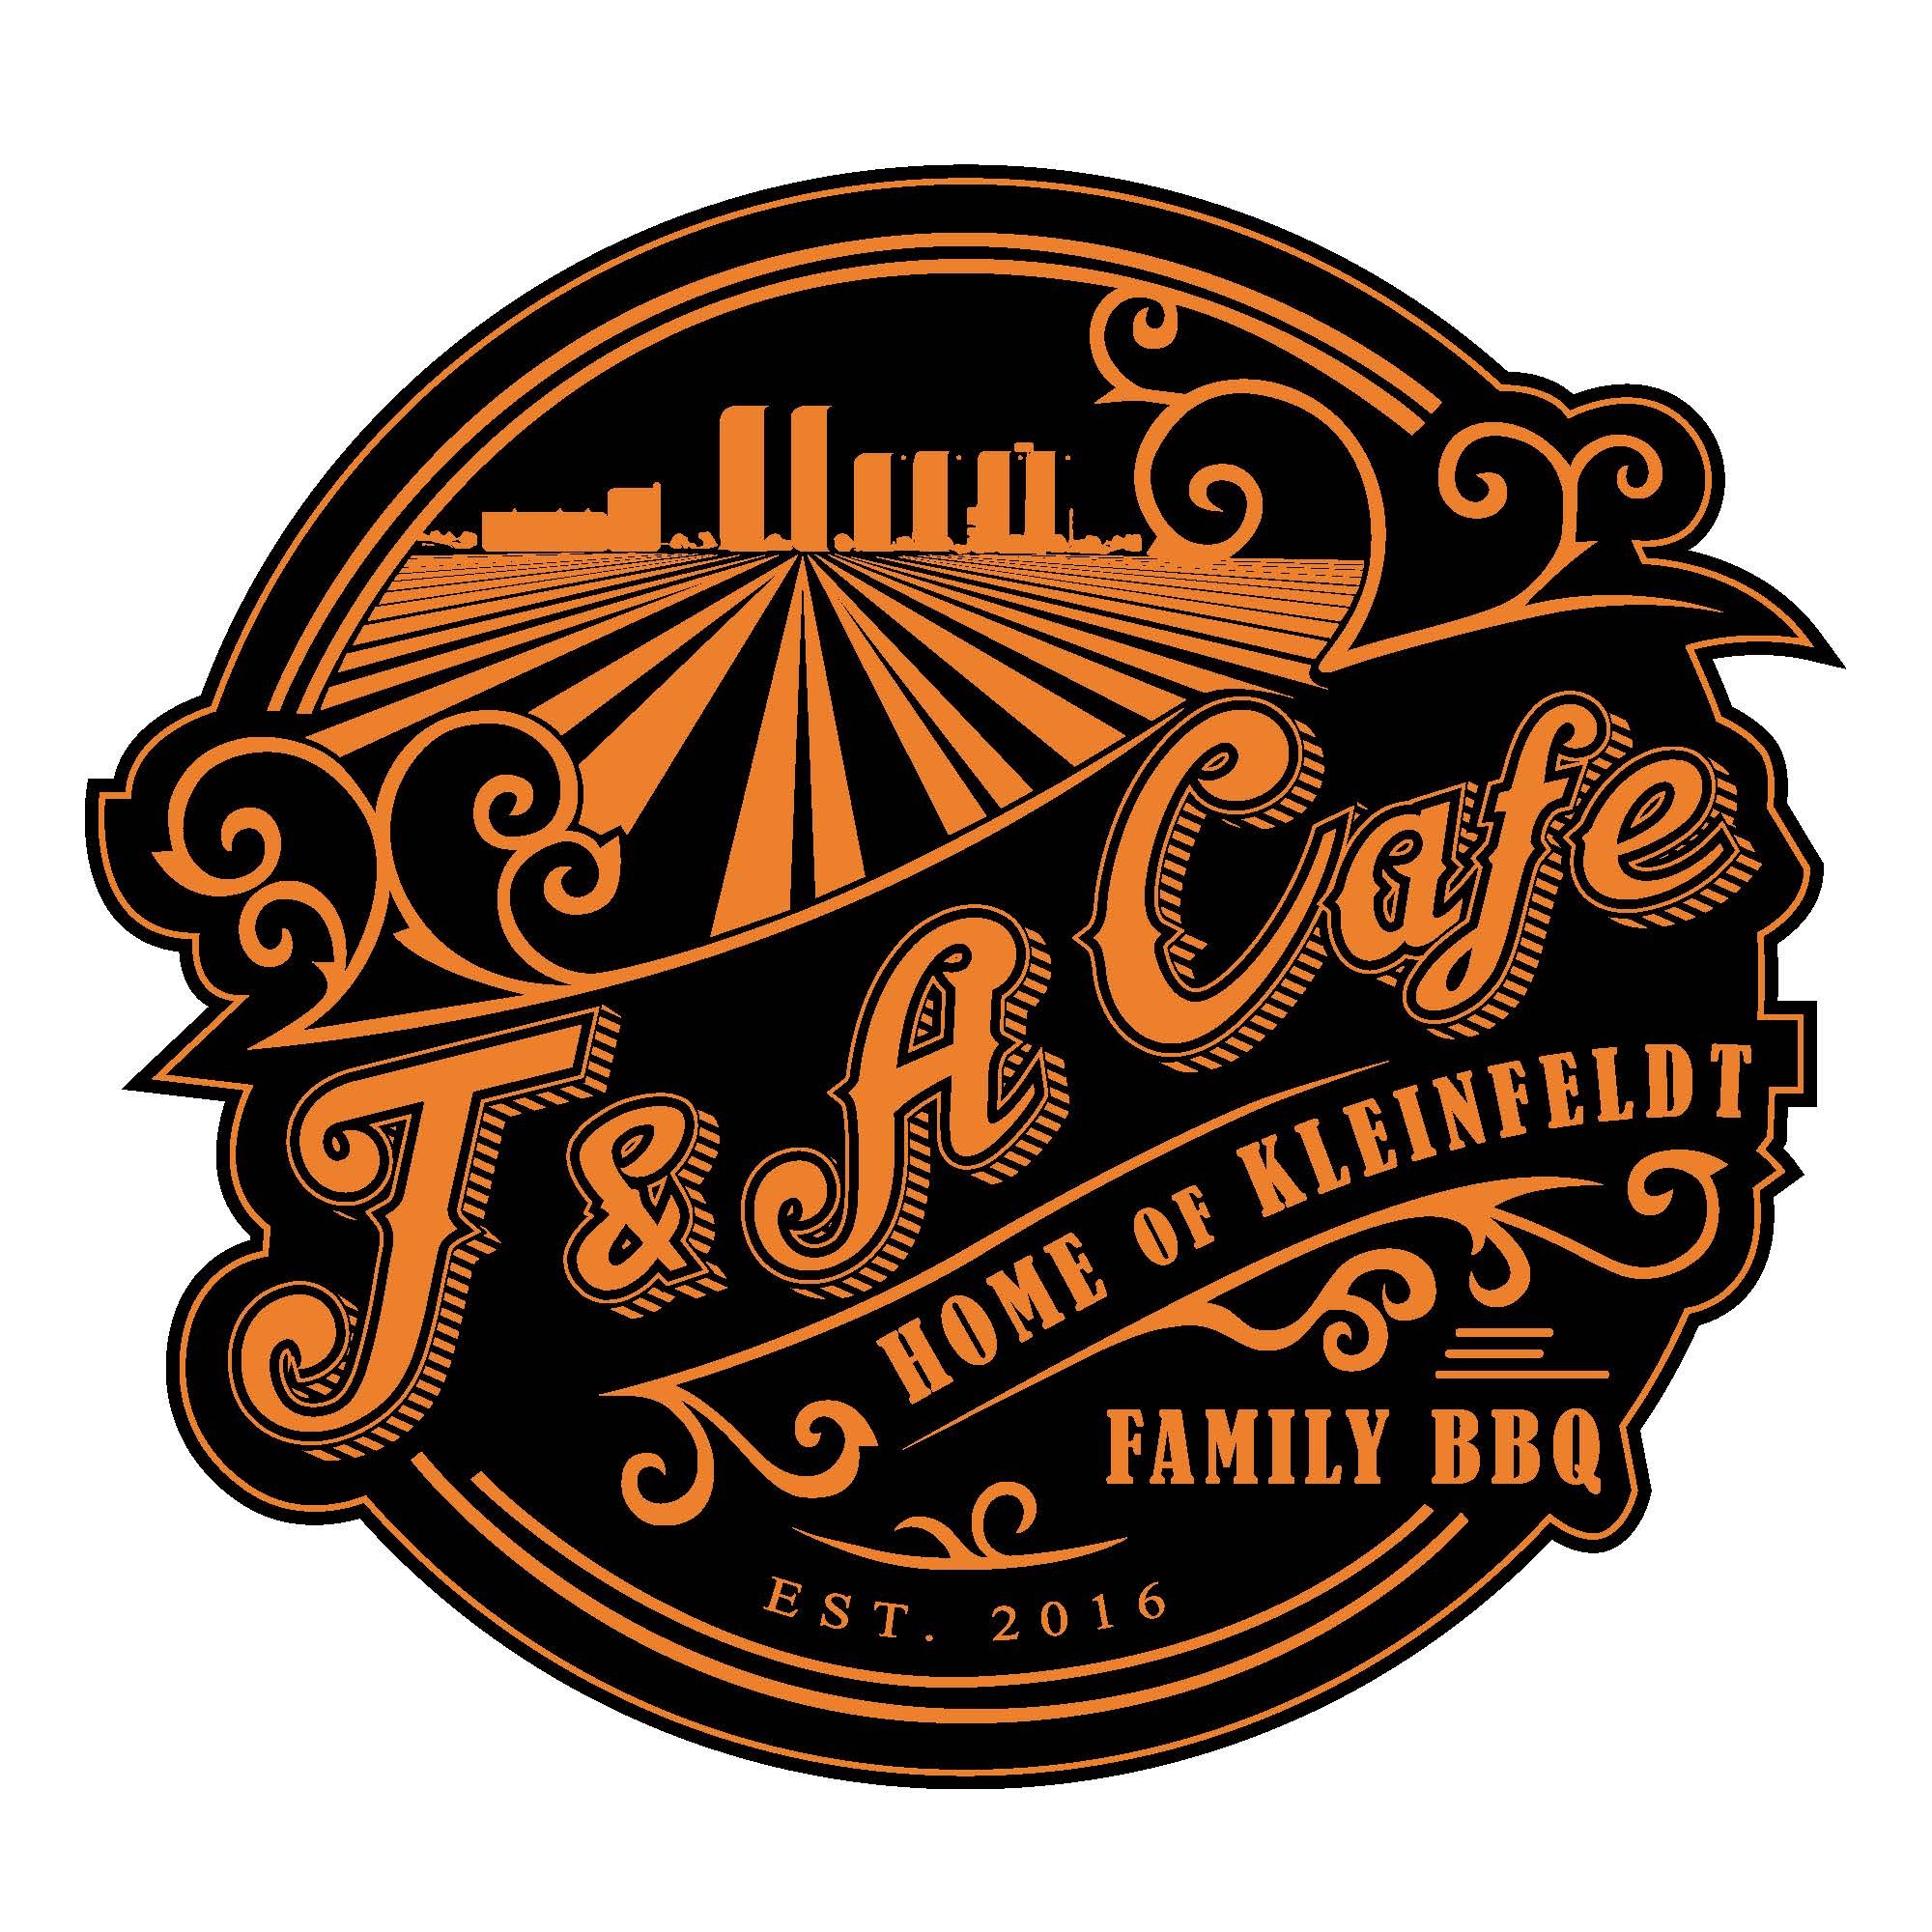 T&A Cafe, Home of Kleinfeldt Family BBQ